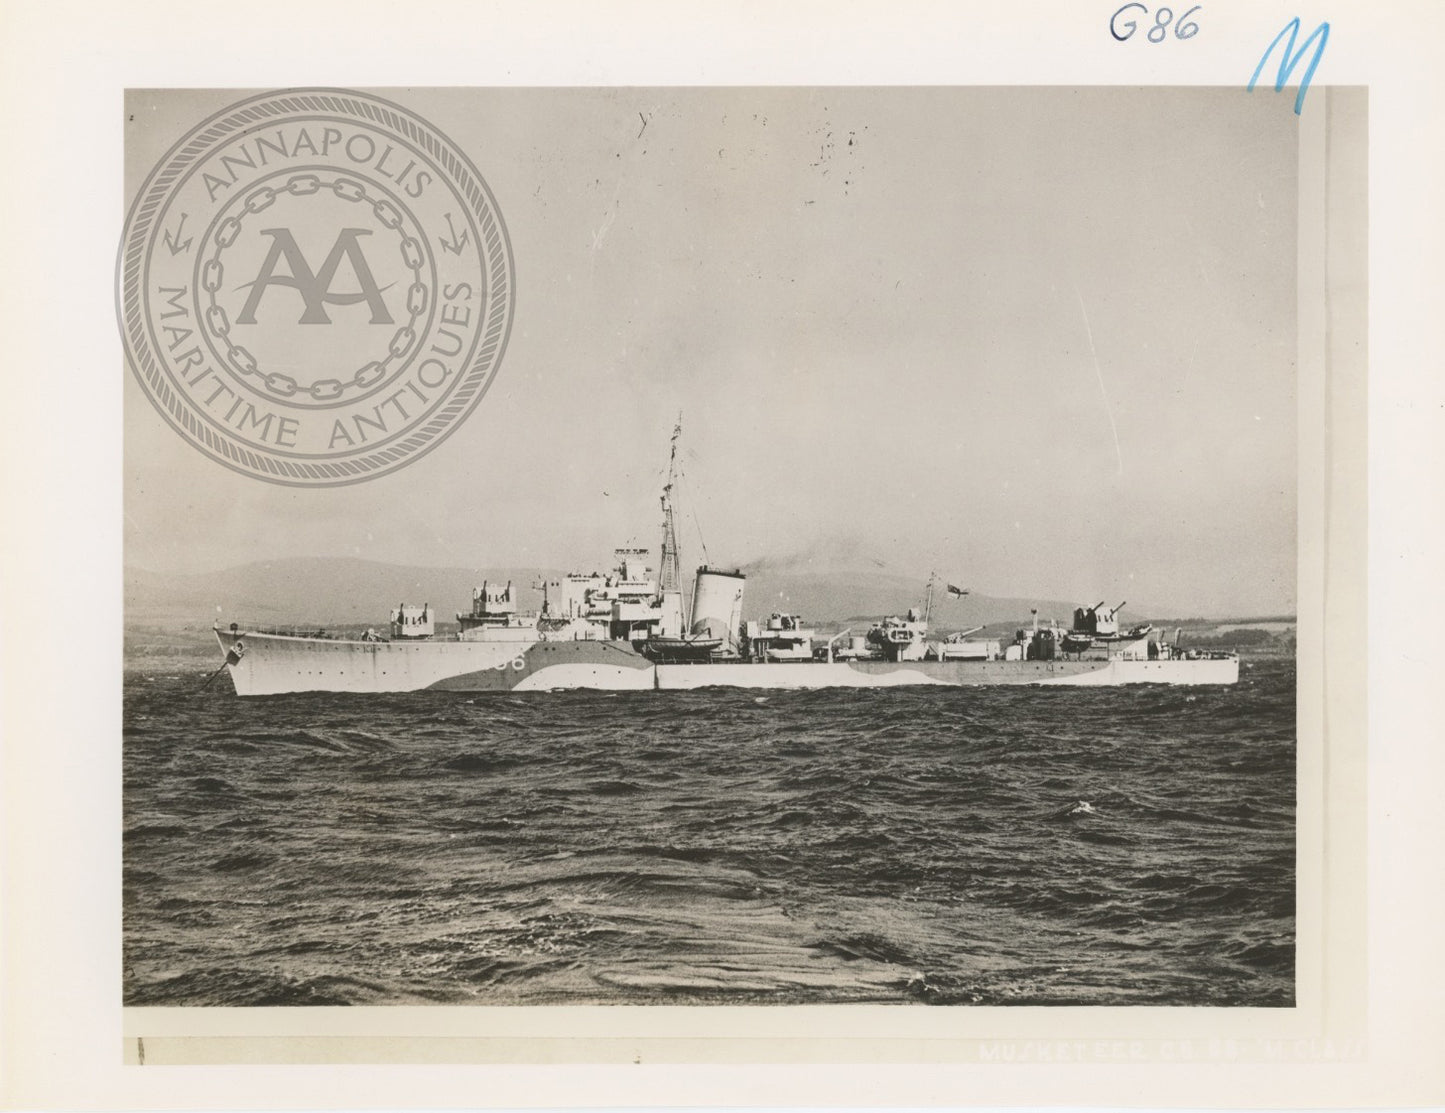 British and Canadian "M" Class Destroyers